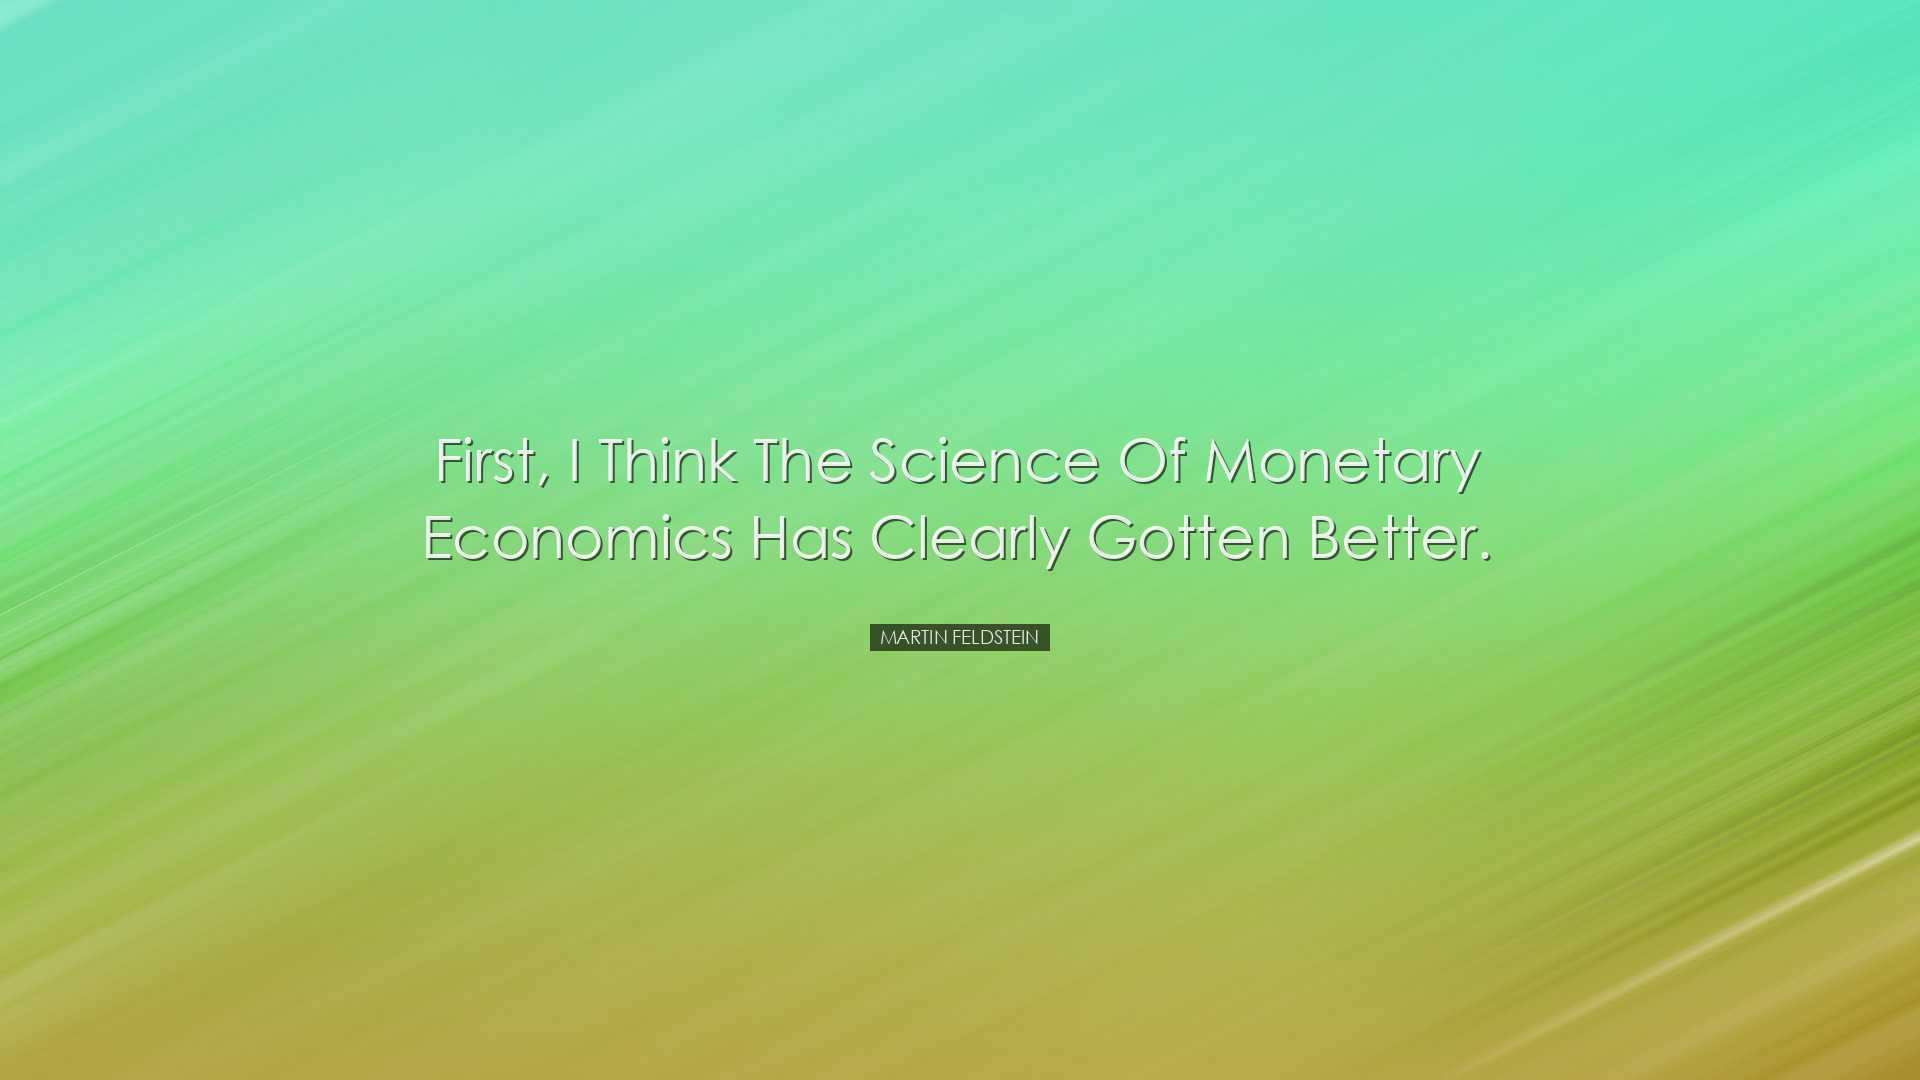 First, I think the science of monetary economics has clearly gotte